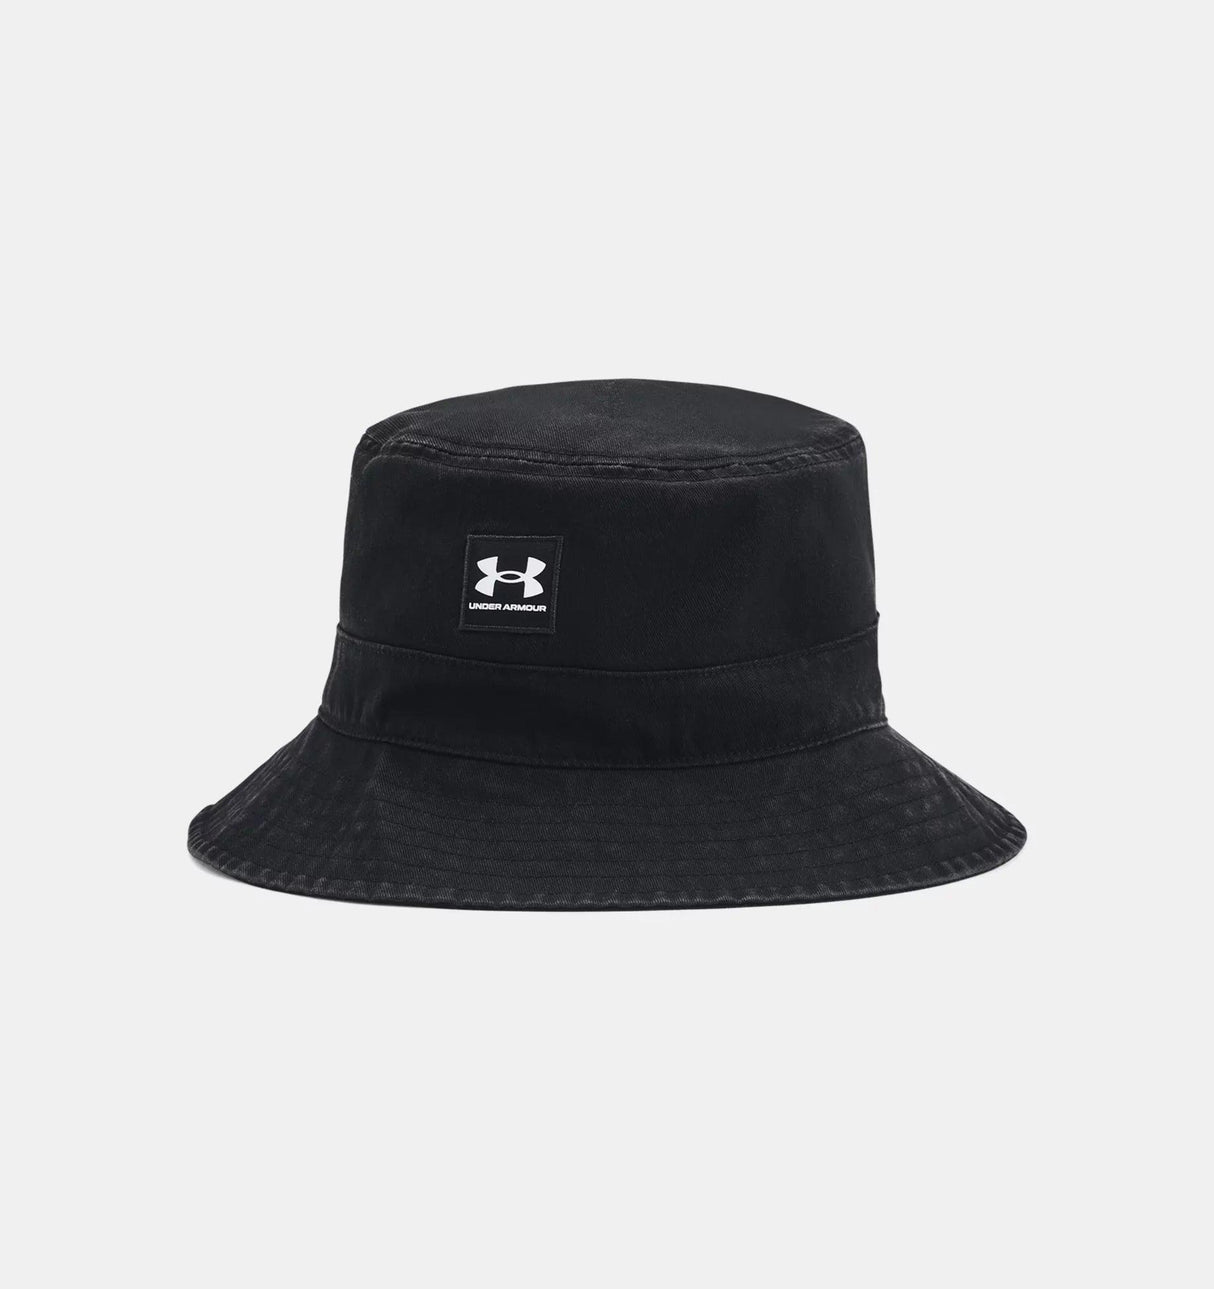 Under Armour Men's Branded Bucket Hat - A&M Clothing & Shoes